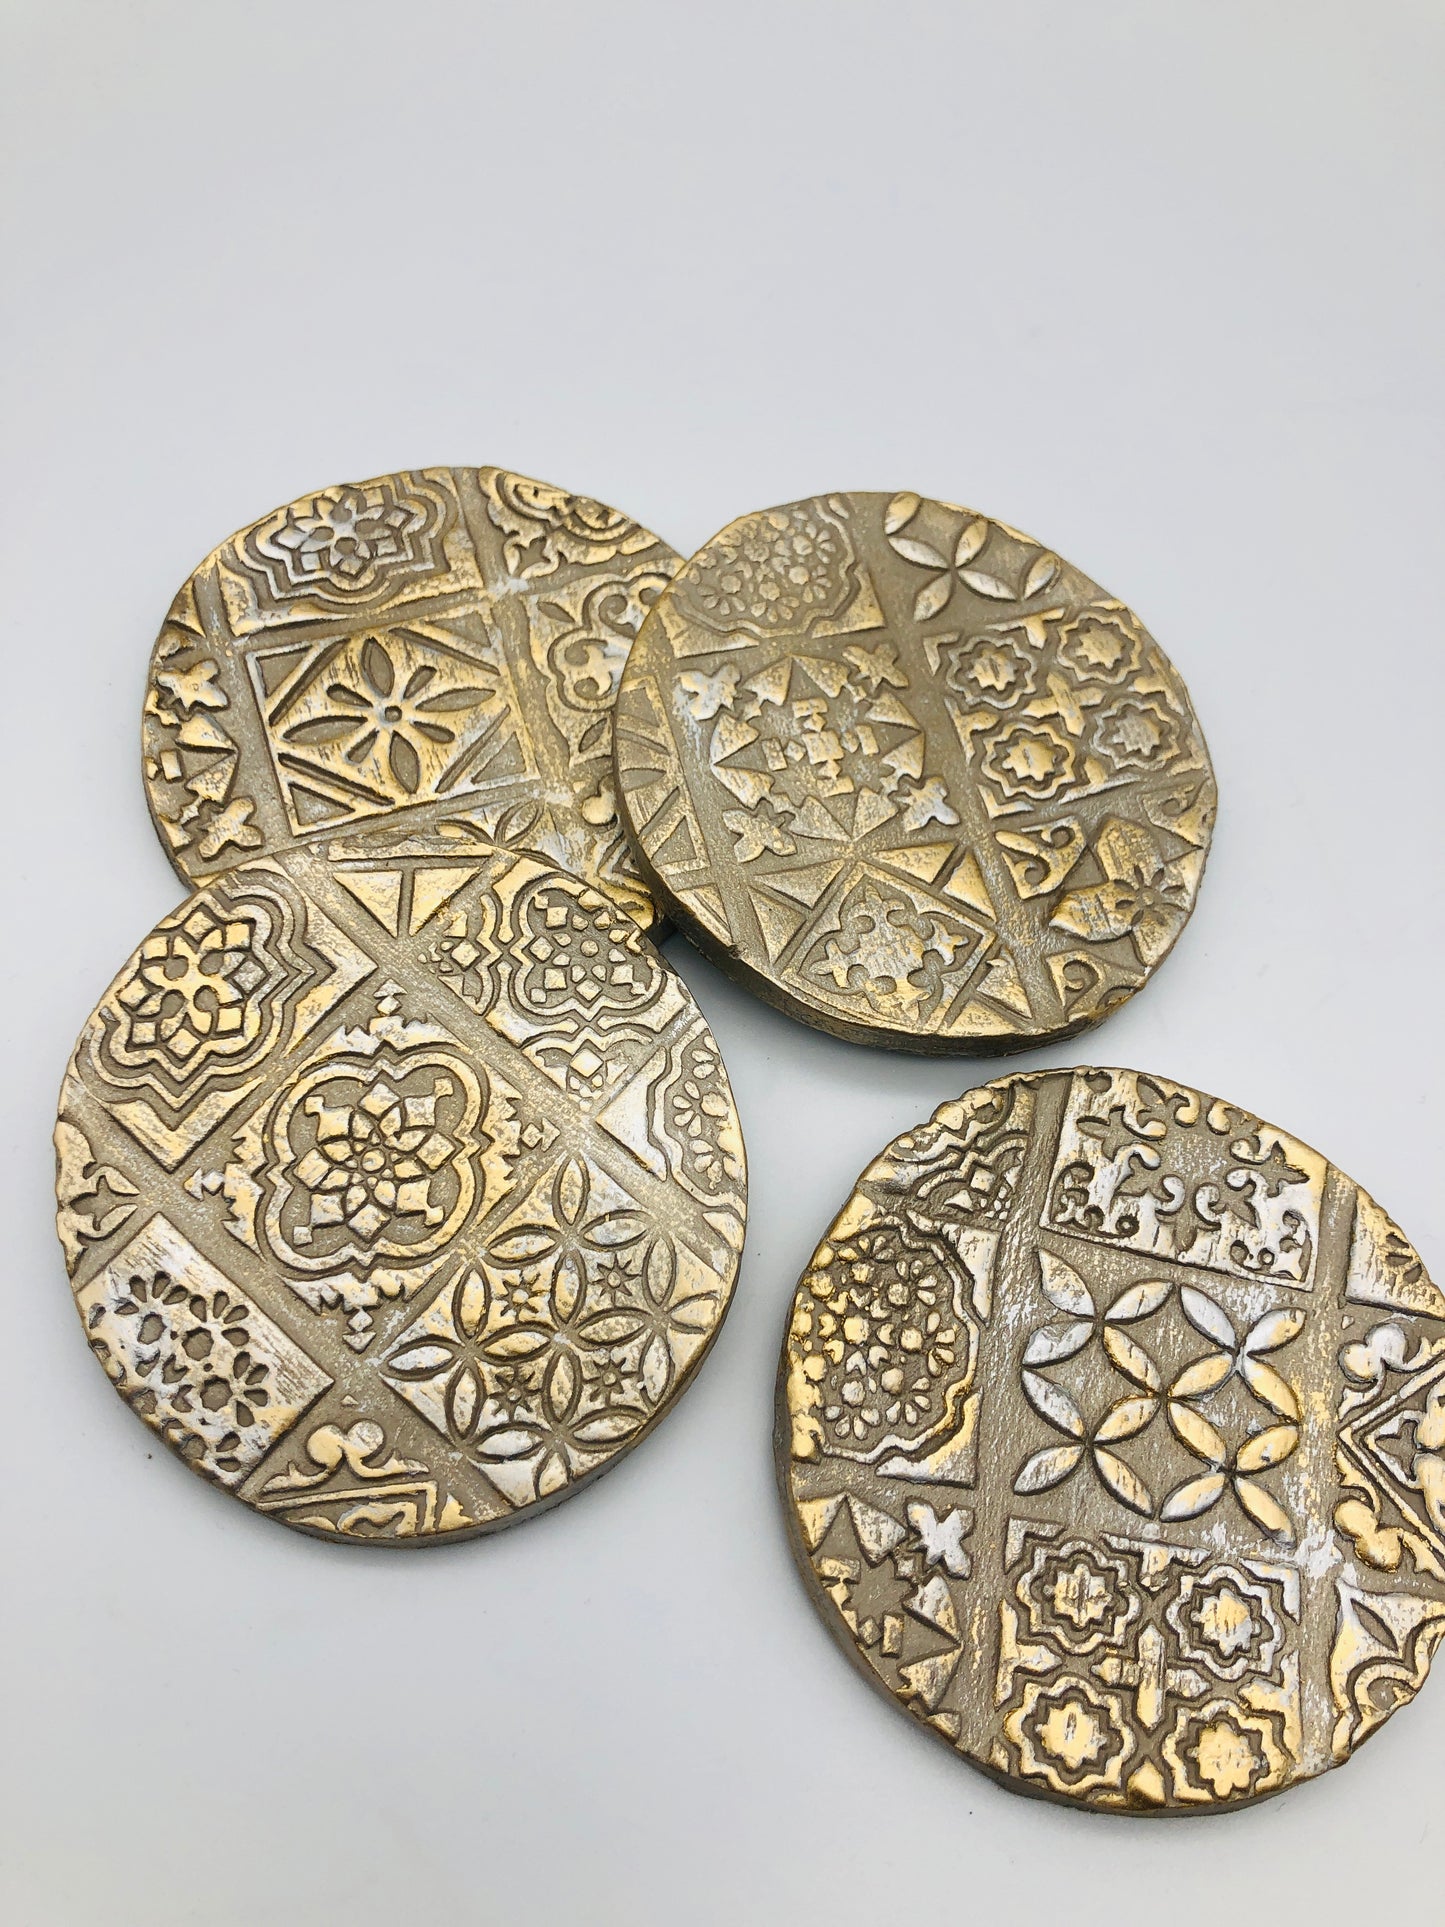 Hand Made Clay Coasters & Worktop Savers - Unique Luxury-The perfect GIFT 🎁